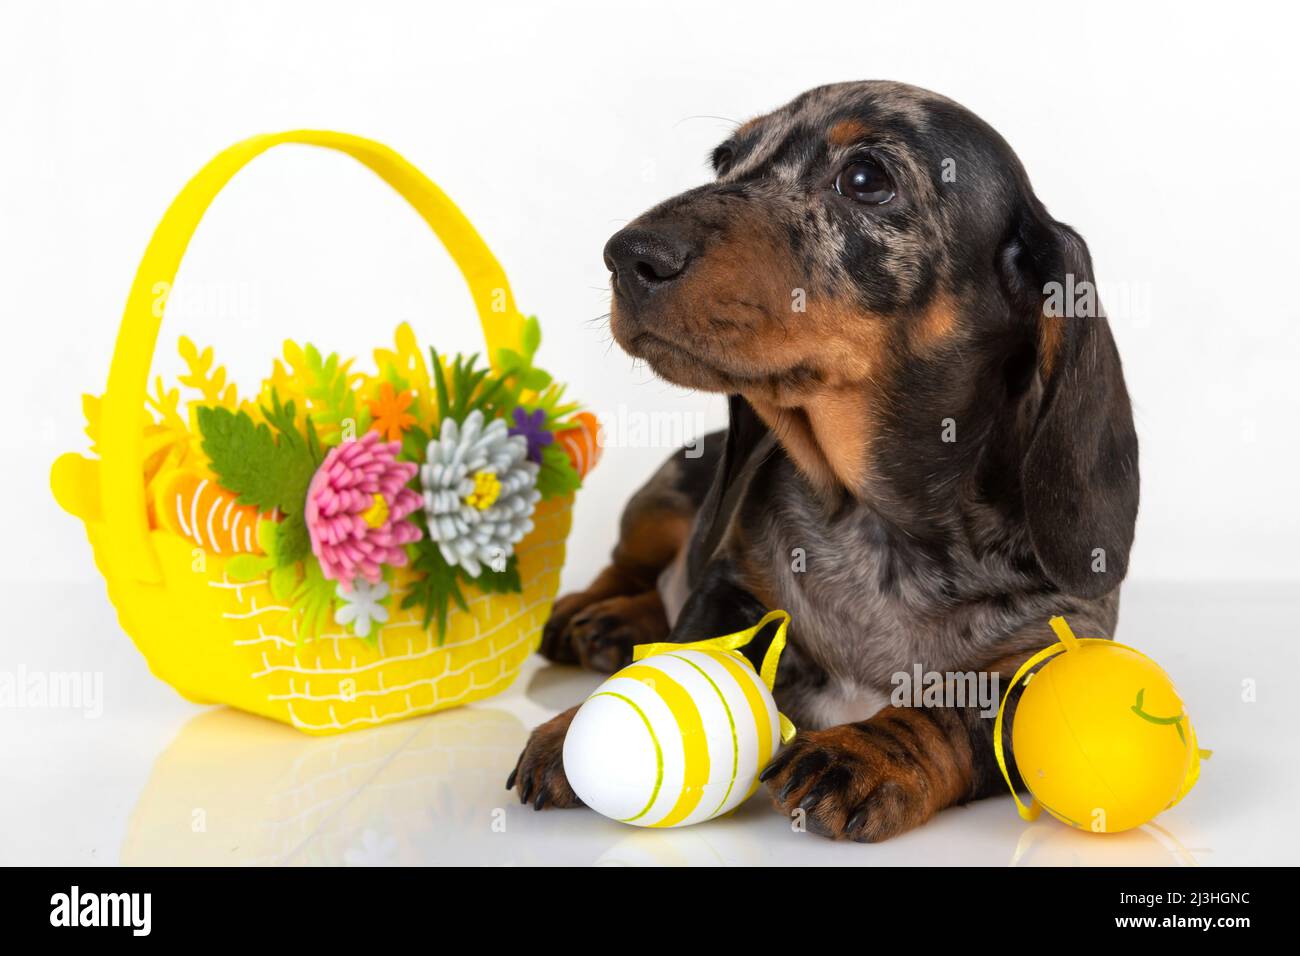 A cute little dachshund puppy is sitting next to a basket of pastel-colored Easter eggs on a white background. The concept of the Easter holiday Stock Photo